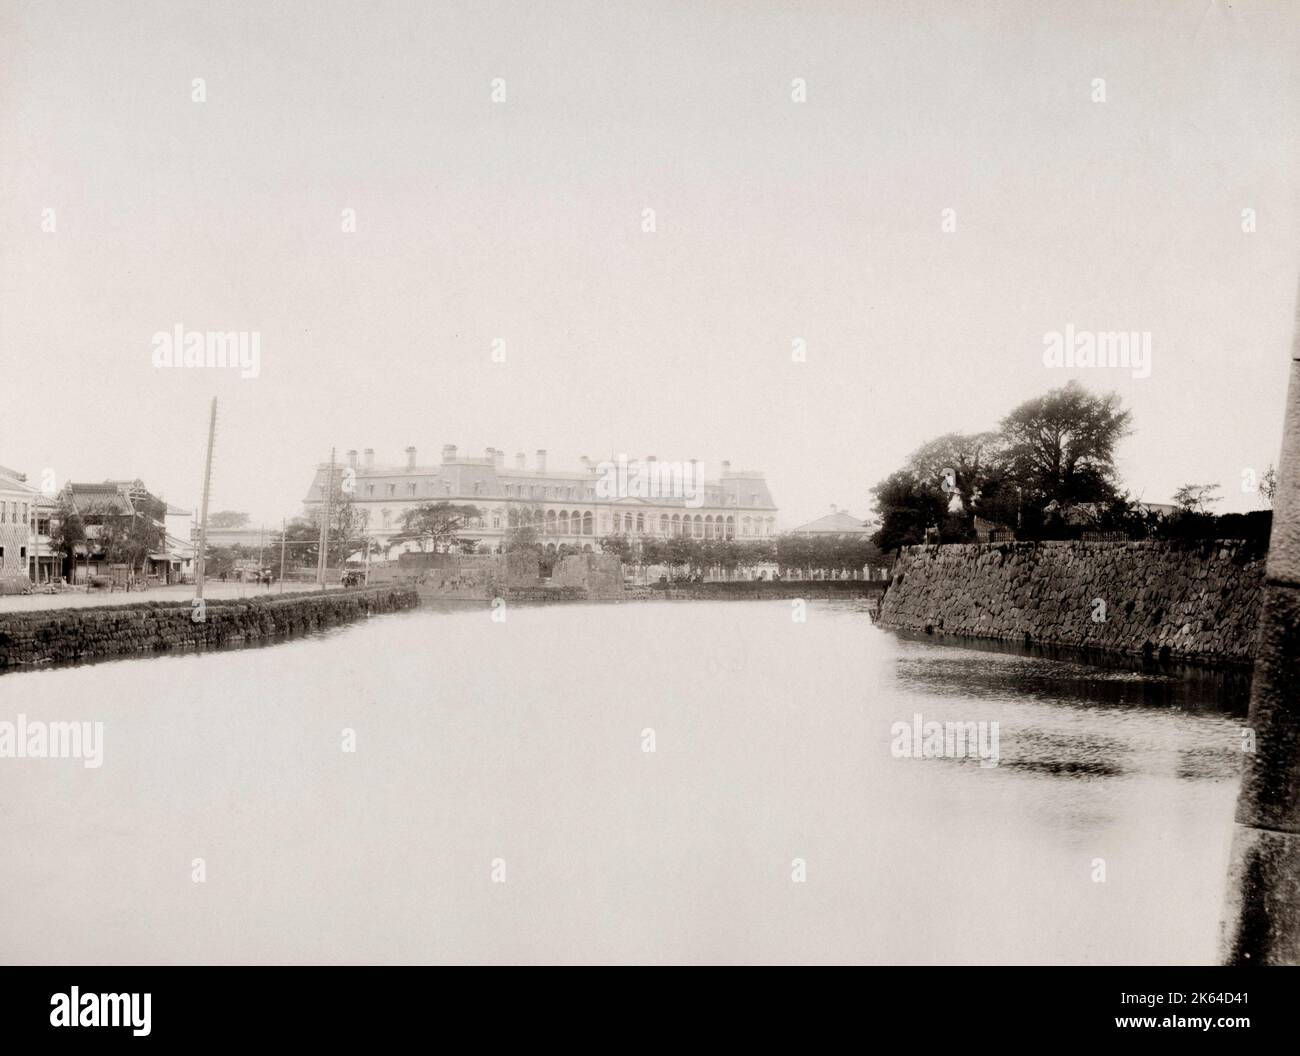 Vintage 19th century photograph: Imperial Hotel Tokyo. Stock Photo